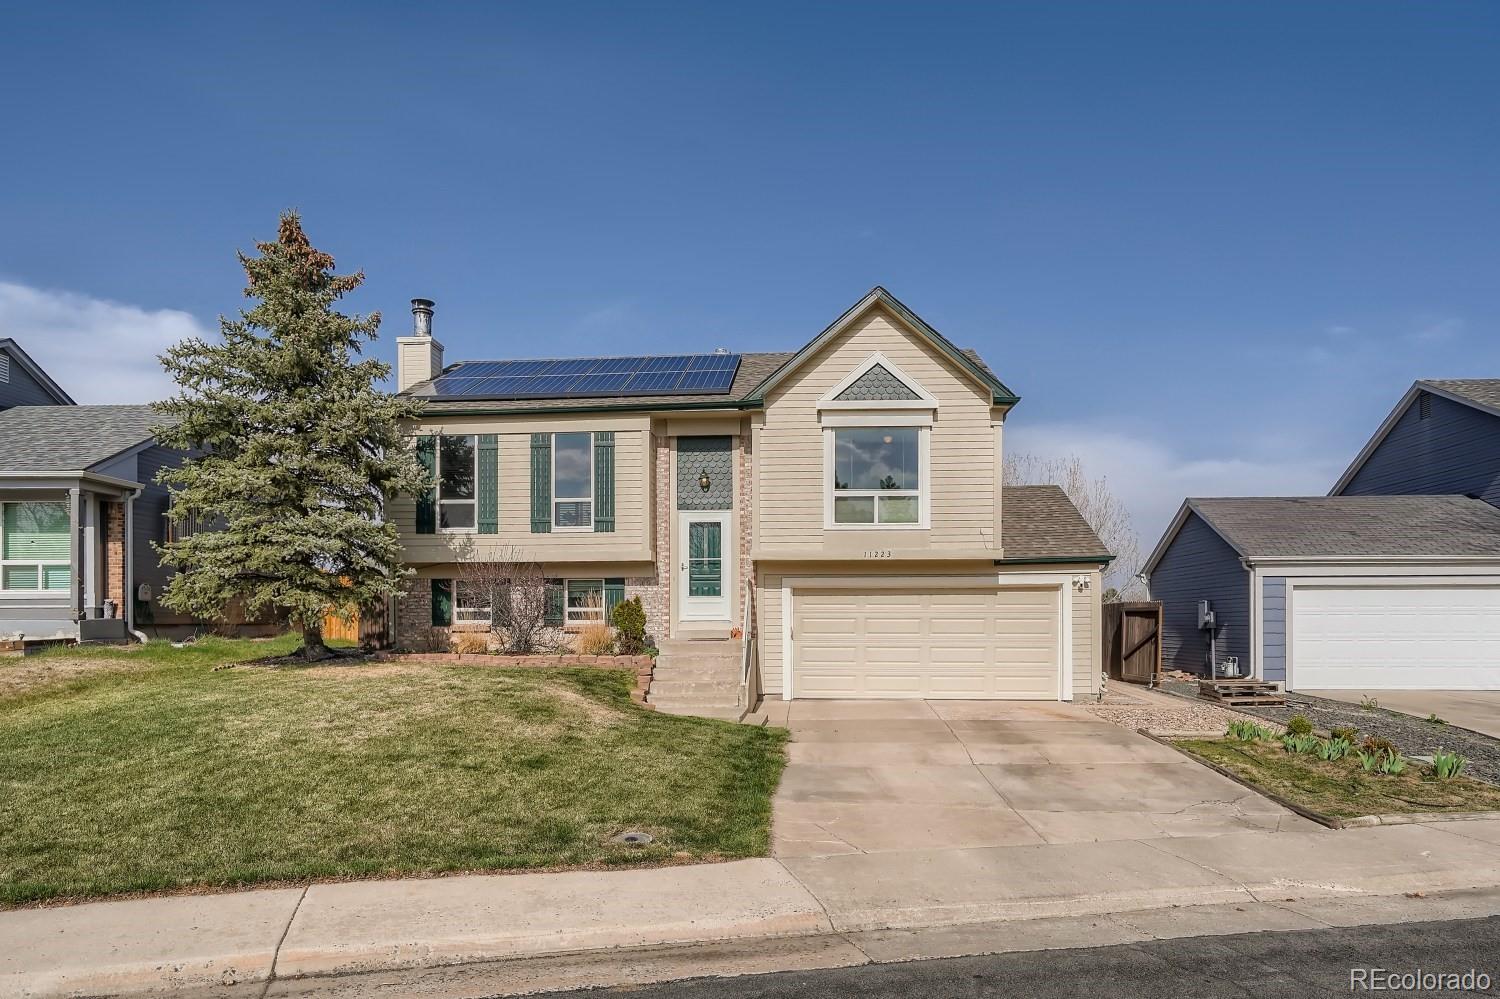 11223 102nd, Westminster, CO